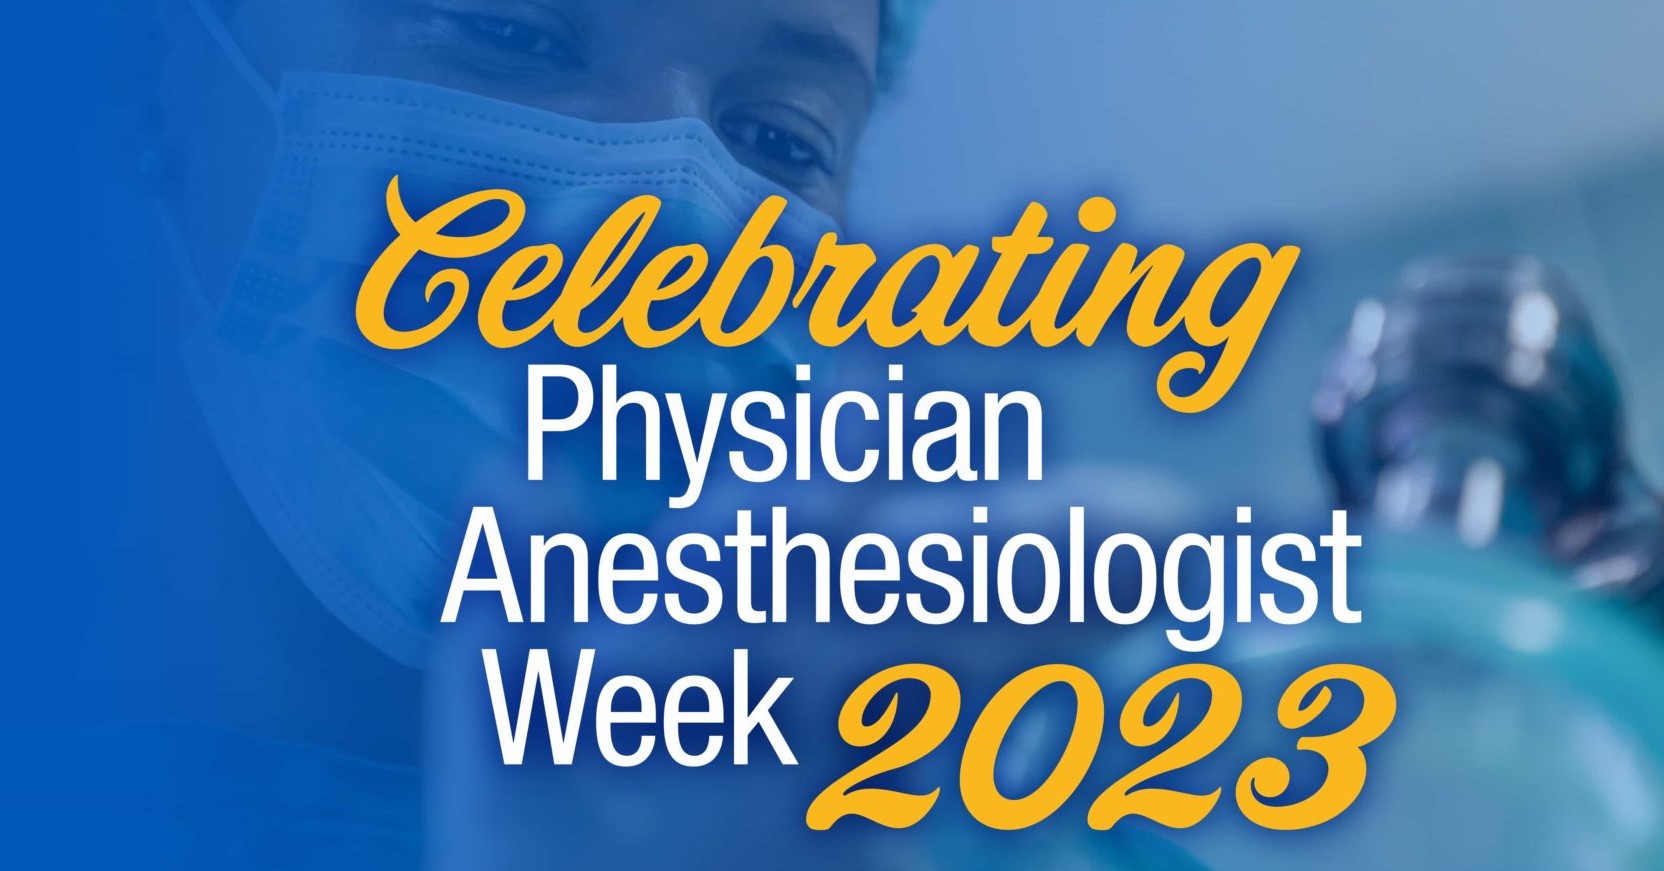 Physician Anesthesiologist Week 2023 Department of Anesthesiology